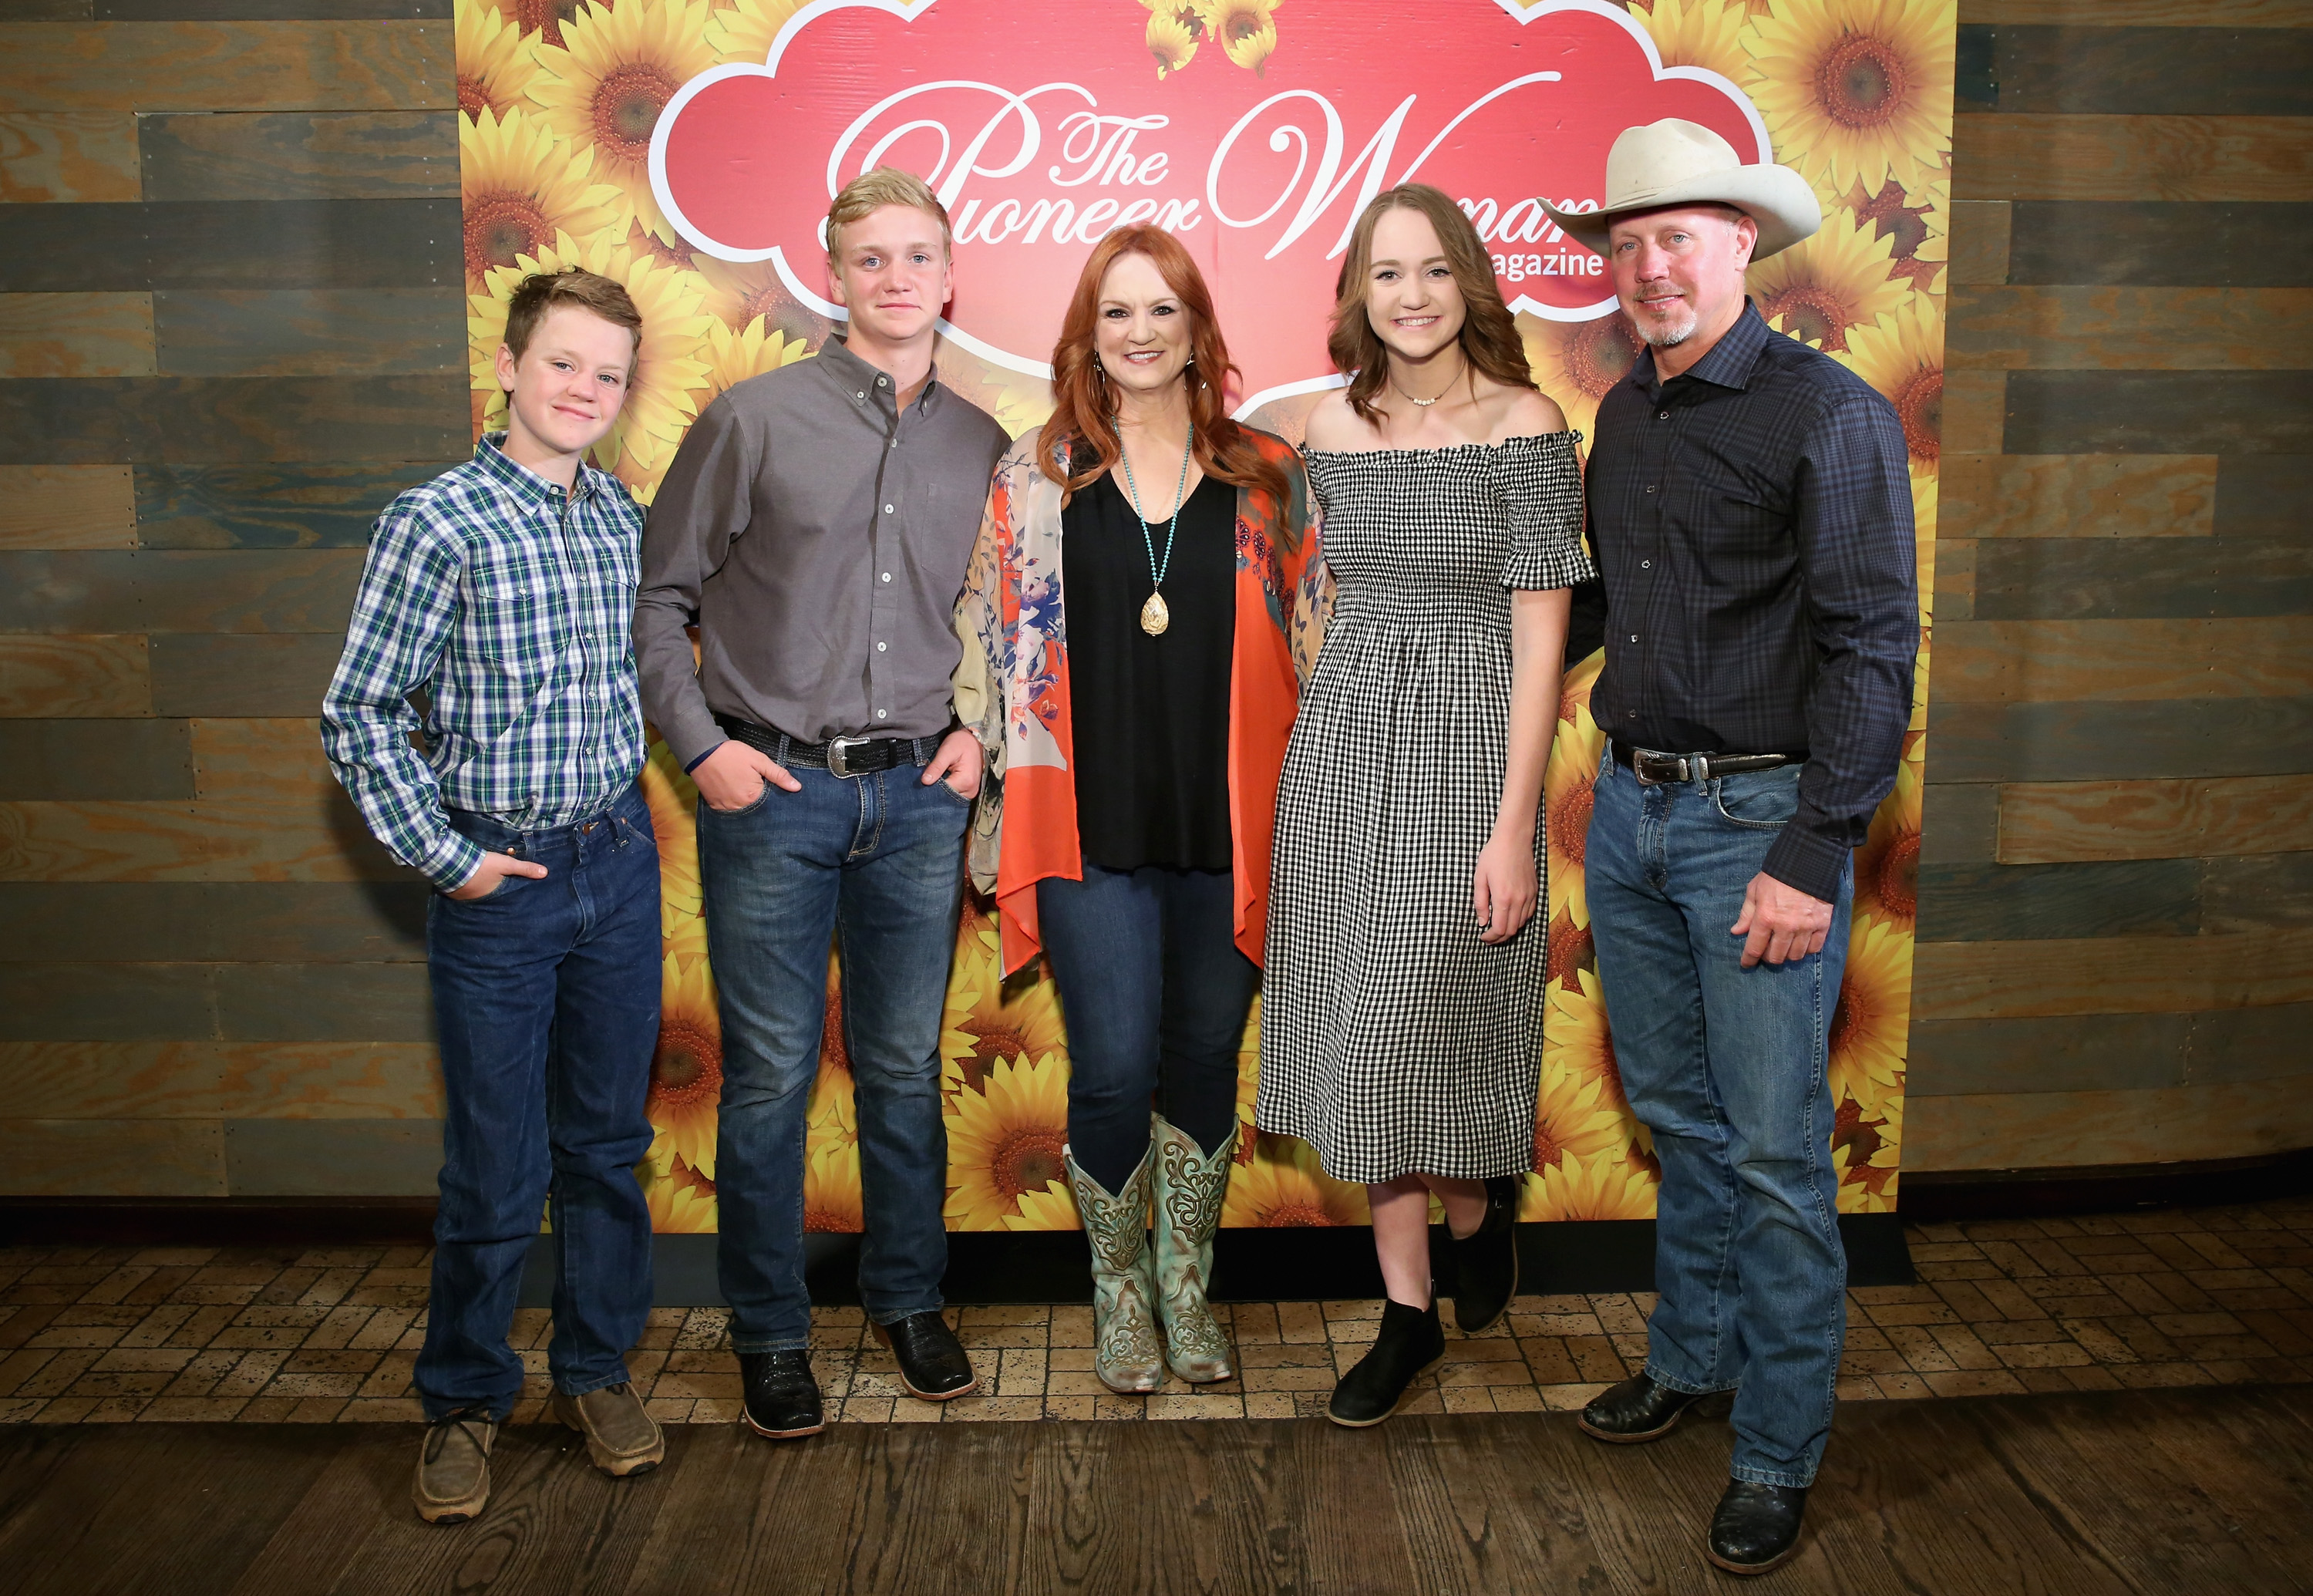 Ree Drummond her family | Monica Schipper/Getty Images for The Pioneer Woman Magazine